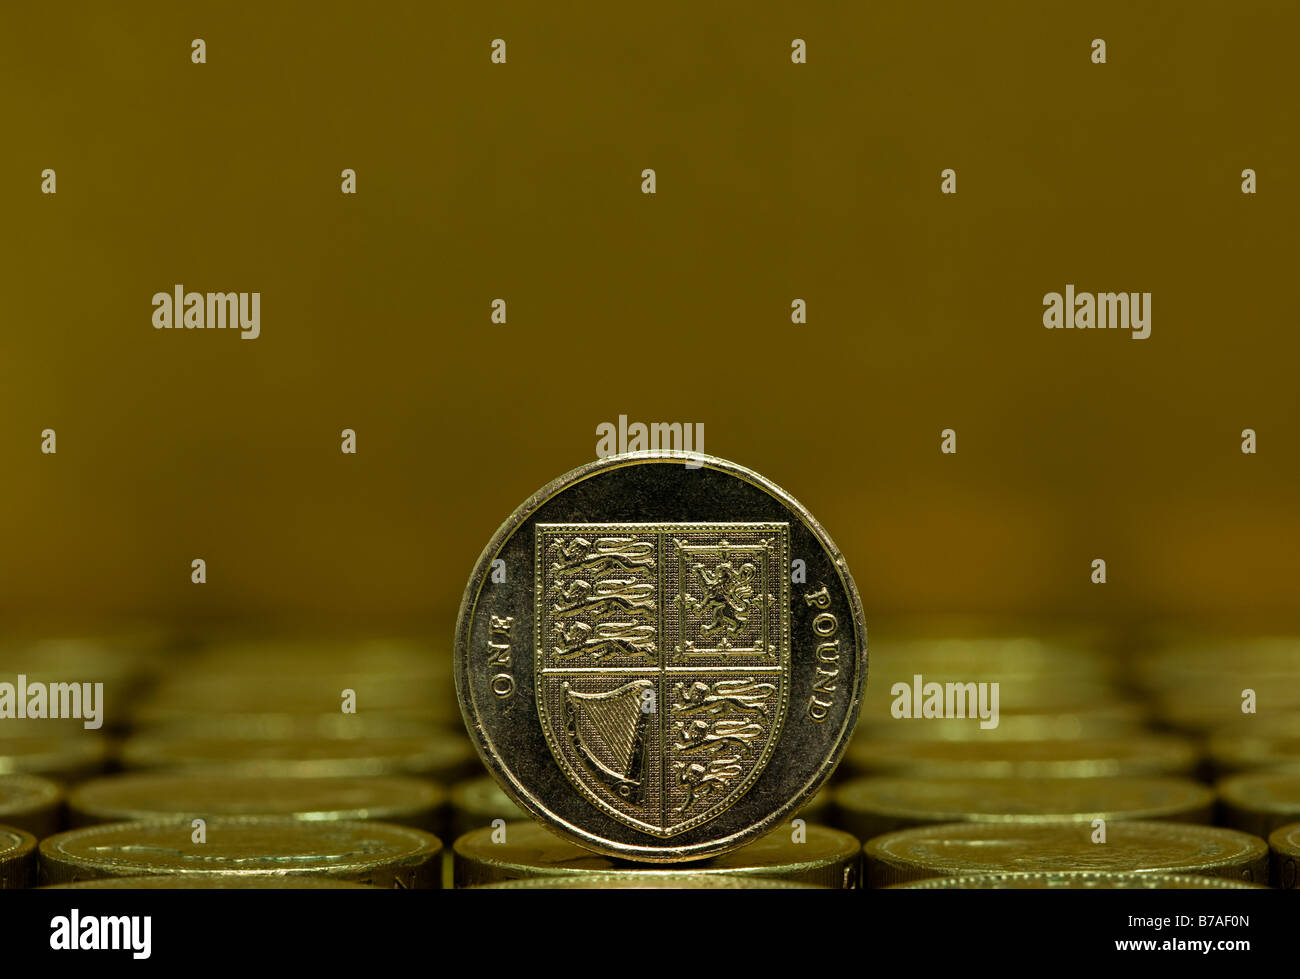 British Pound coins, currency of the UK, Europe Stock Photo